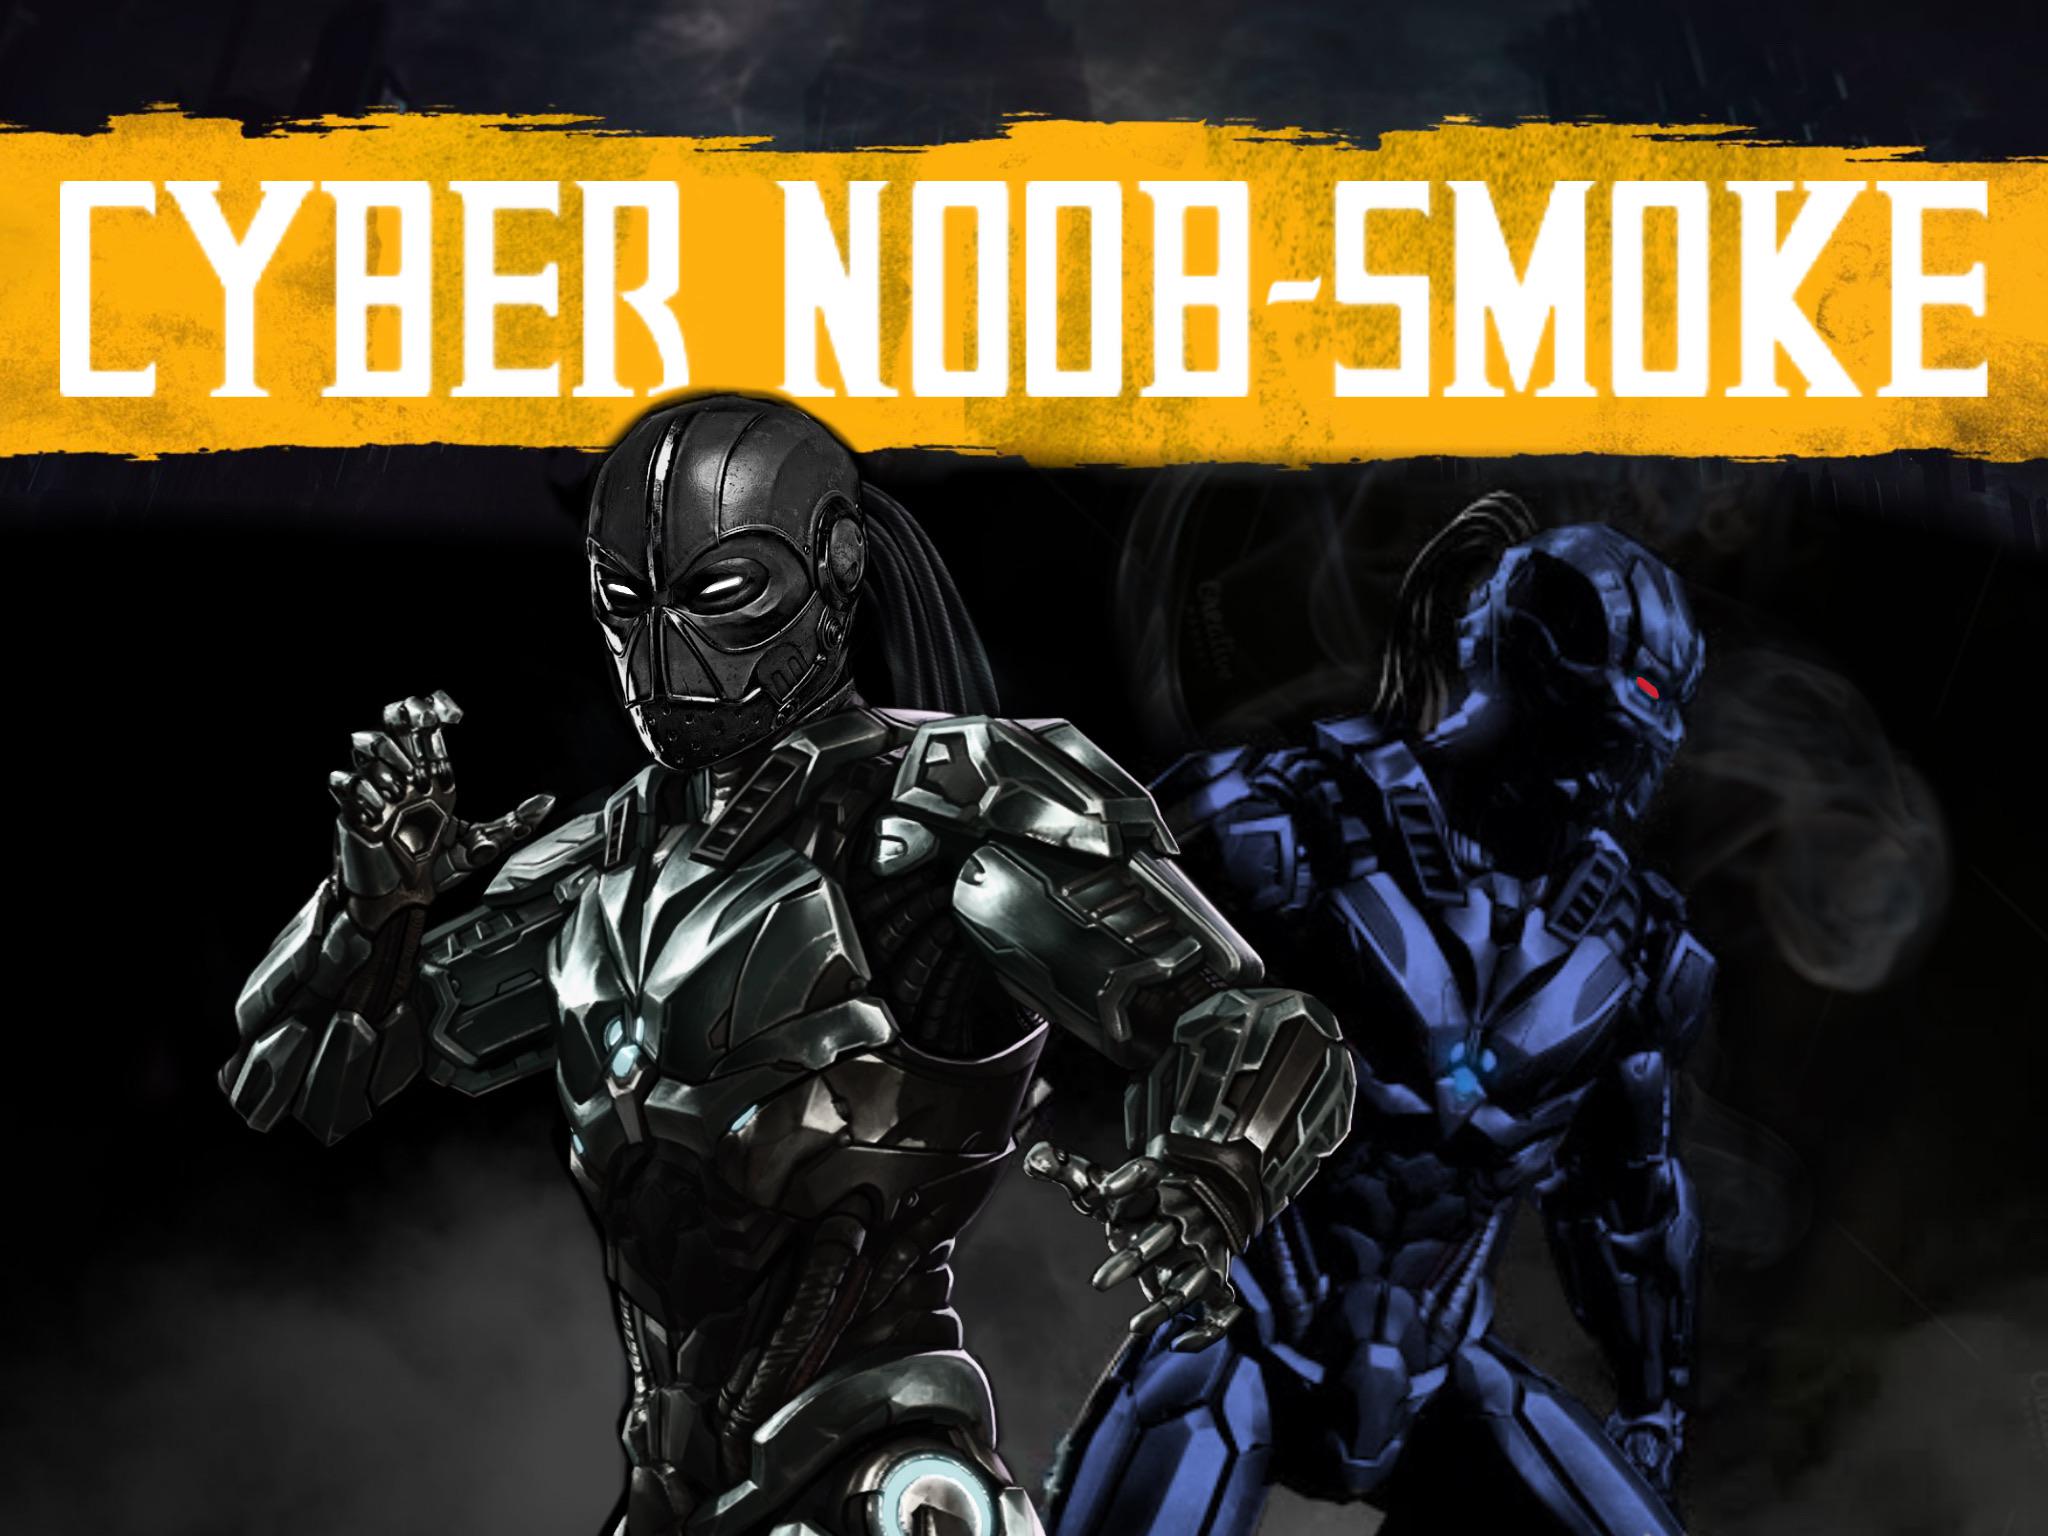 CYBER NOOB SMOKE Edit. This Game Out Even More Badass Than I Expected